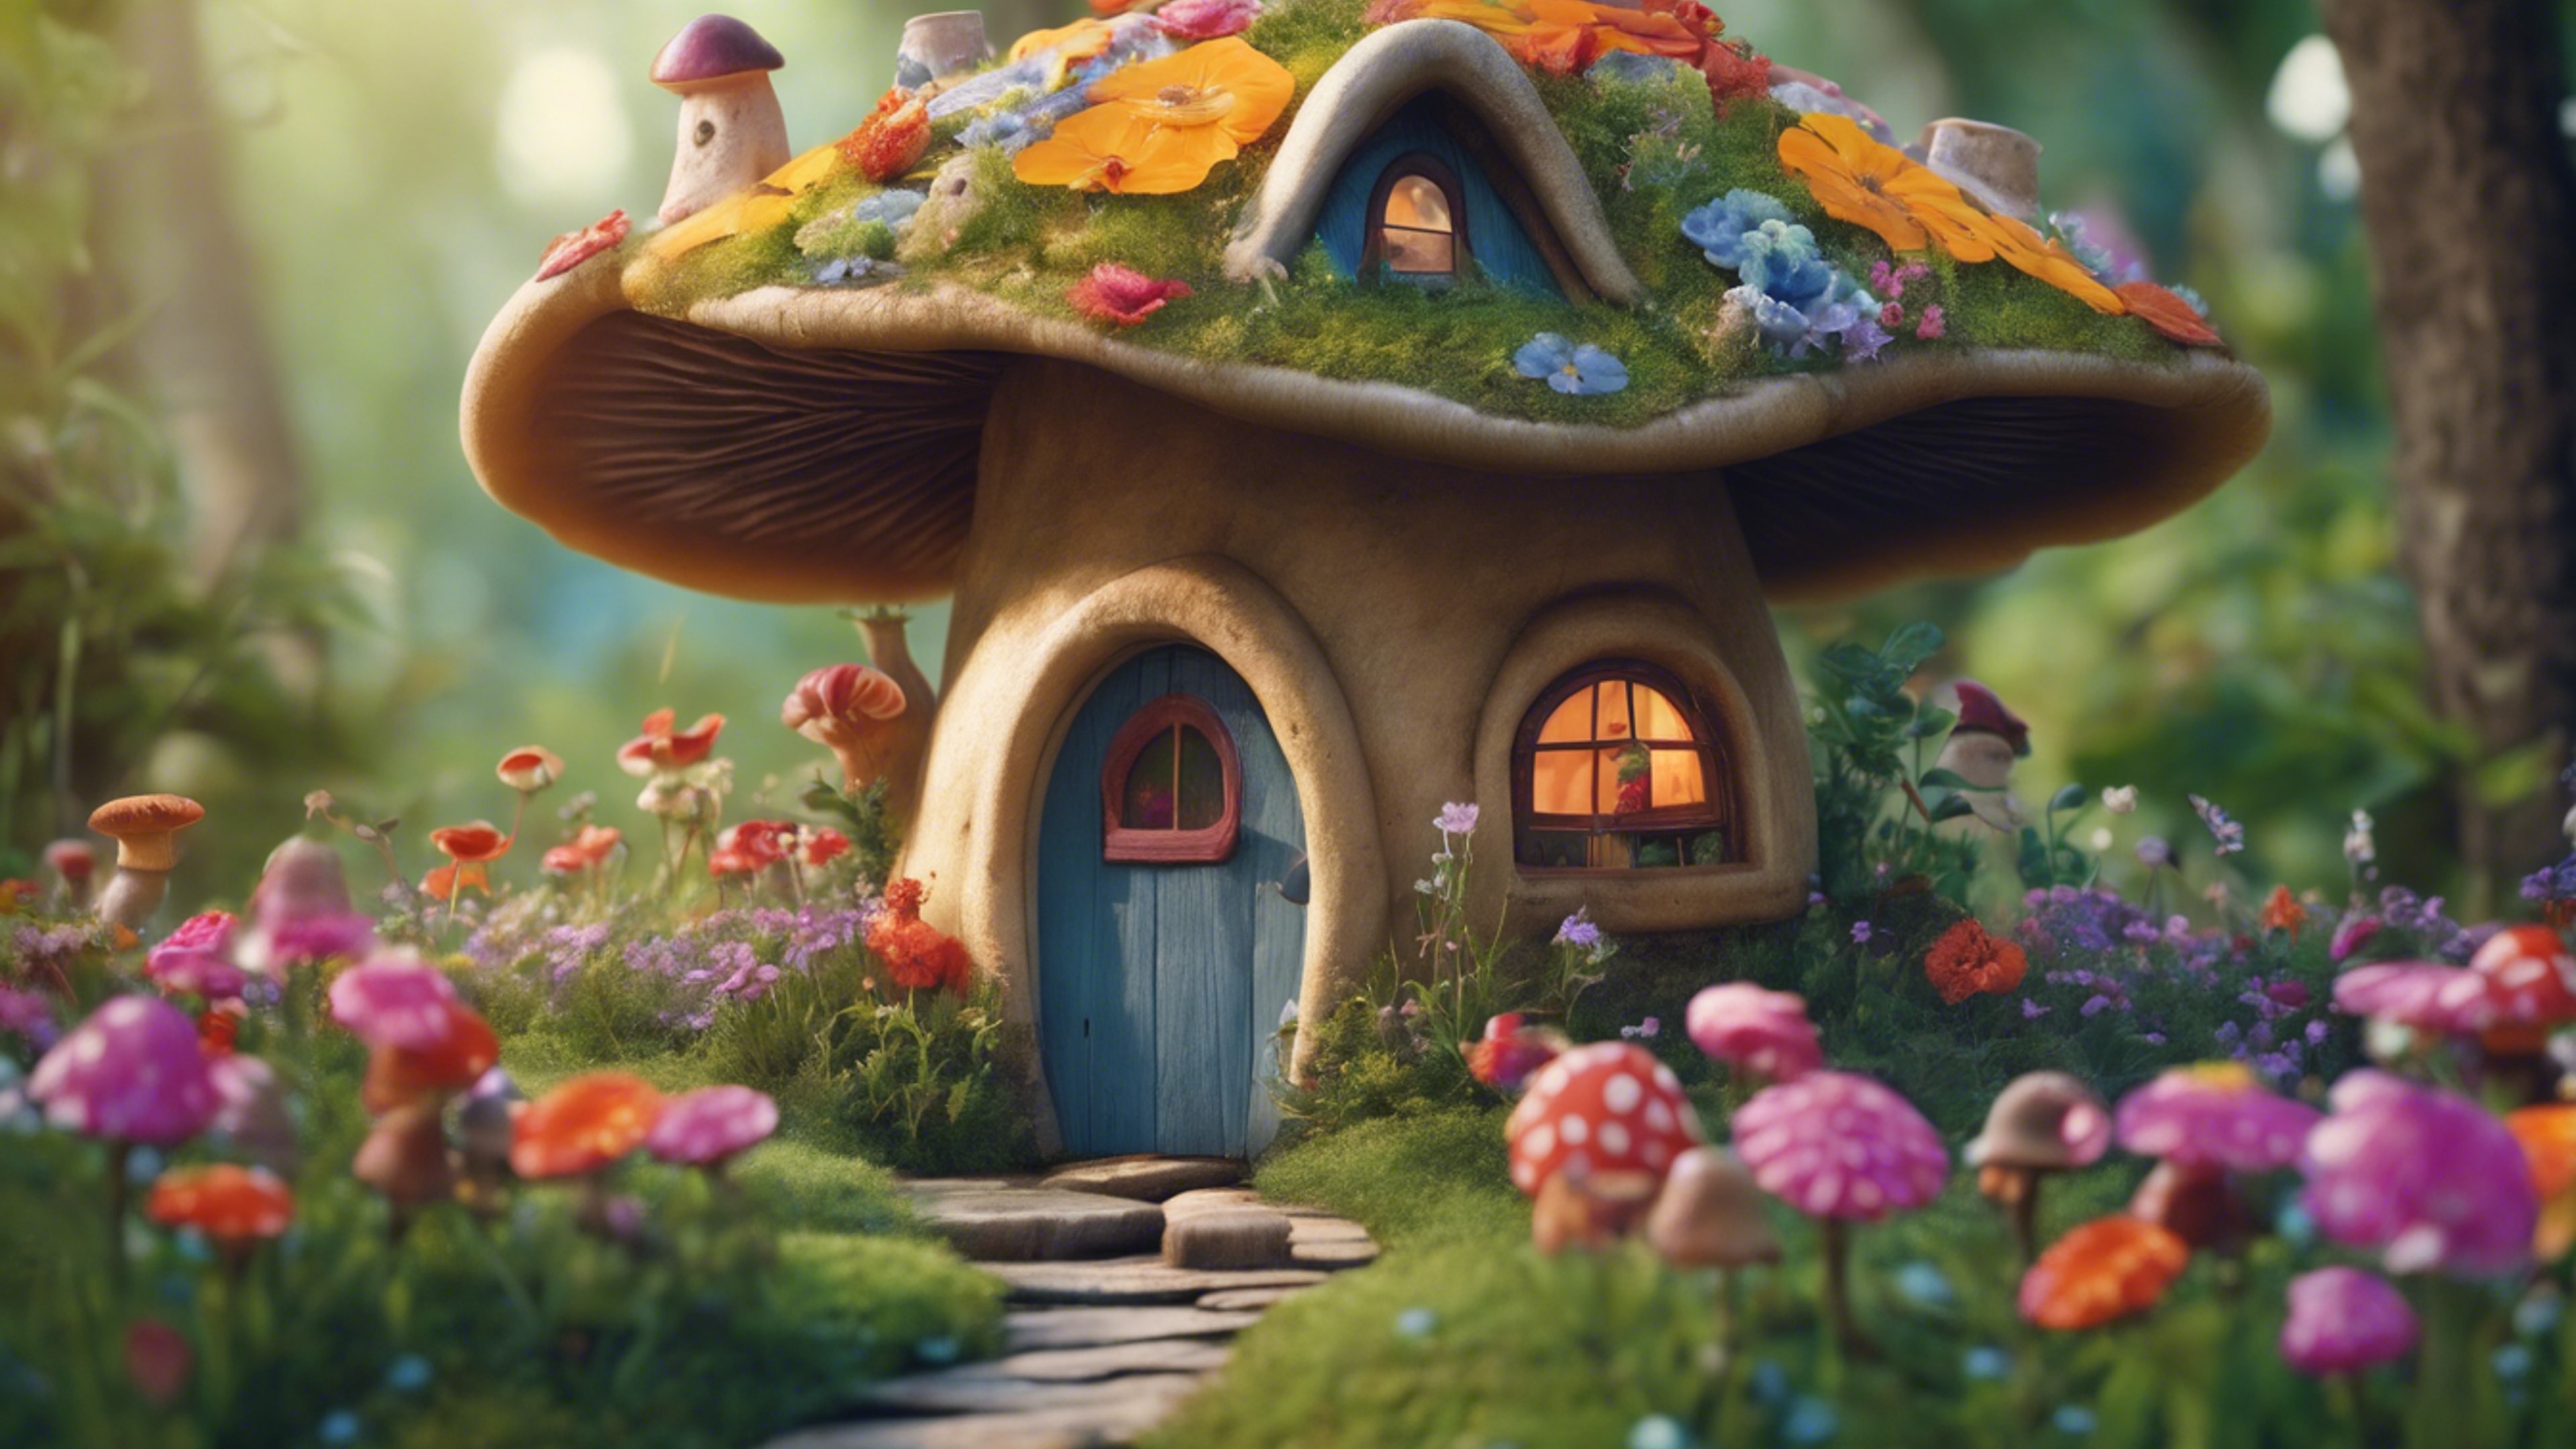 An old-fashioned, whimsical mushroom house, straight out of a children's storybook, nestled amid colorful flowers at the end of a winding path. Tapéta[bbbff29f860842789321]